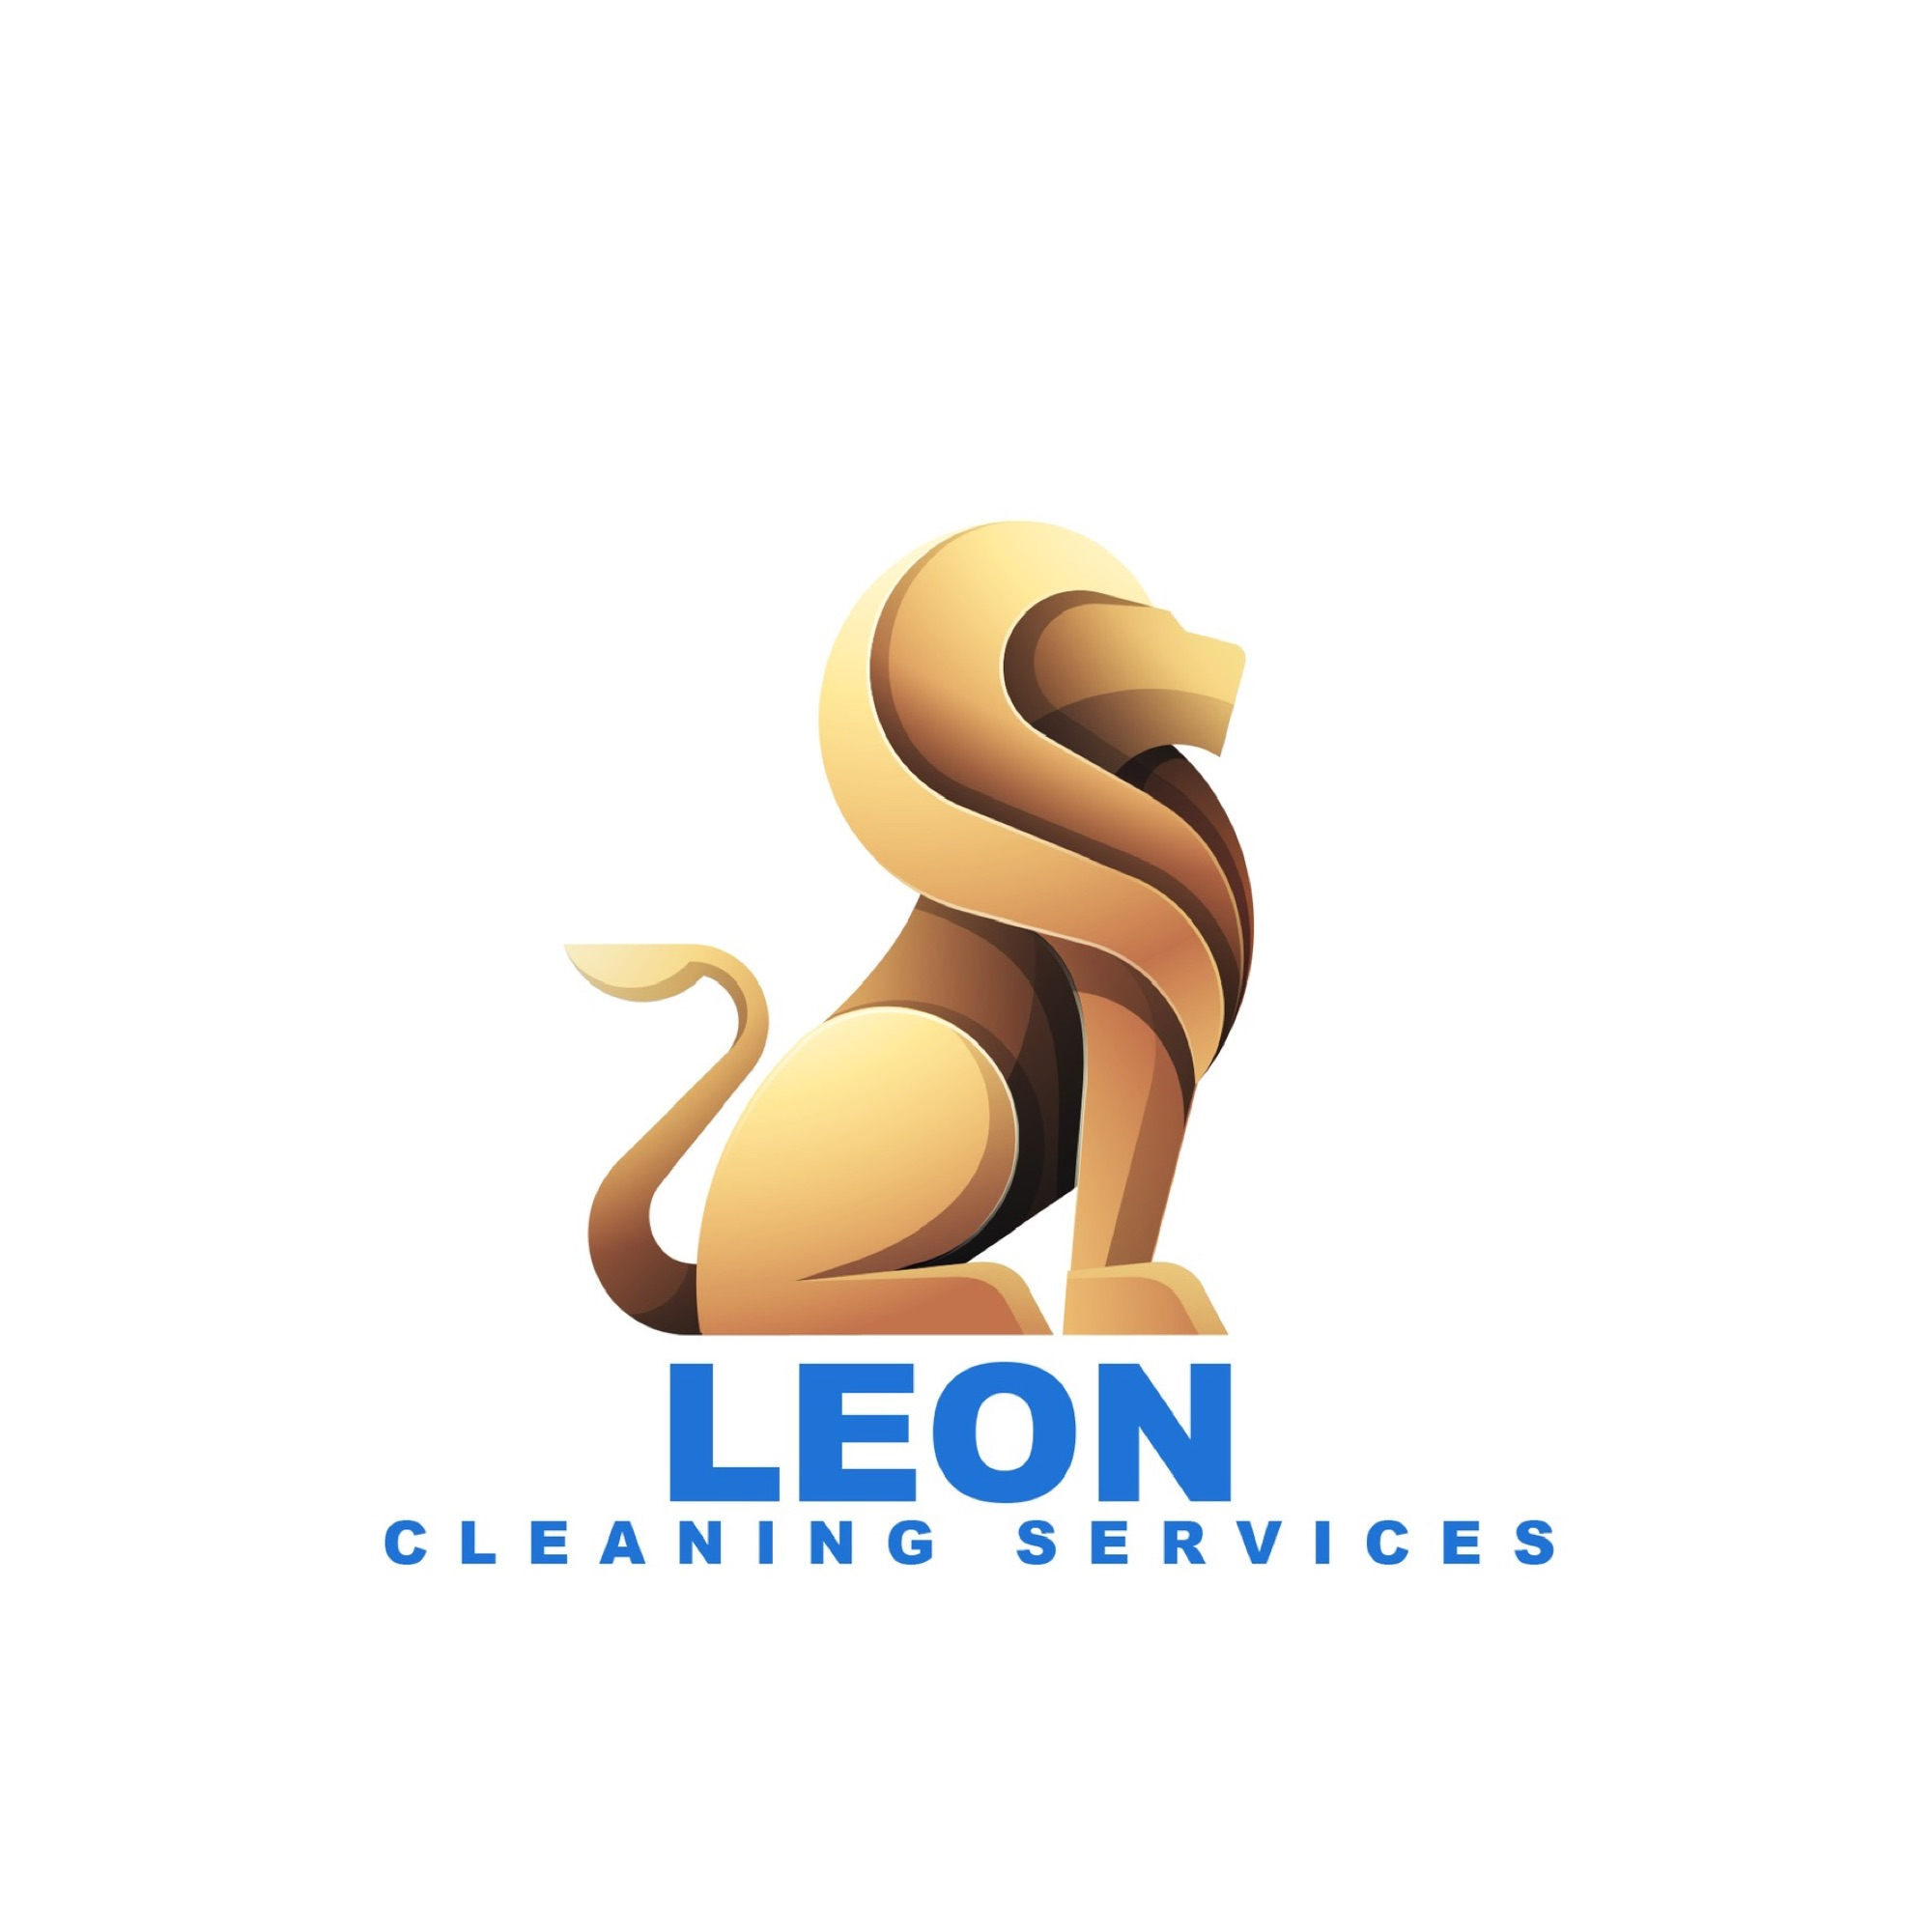 Leon Cleaning Services, LLC Logo